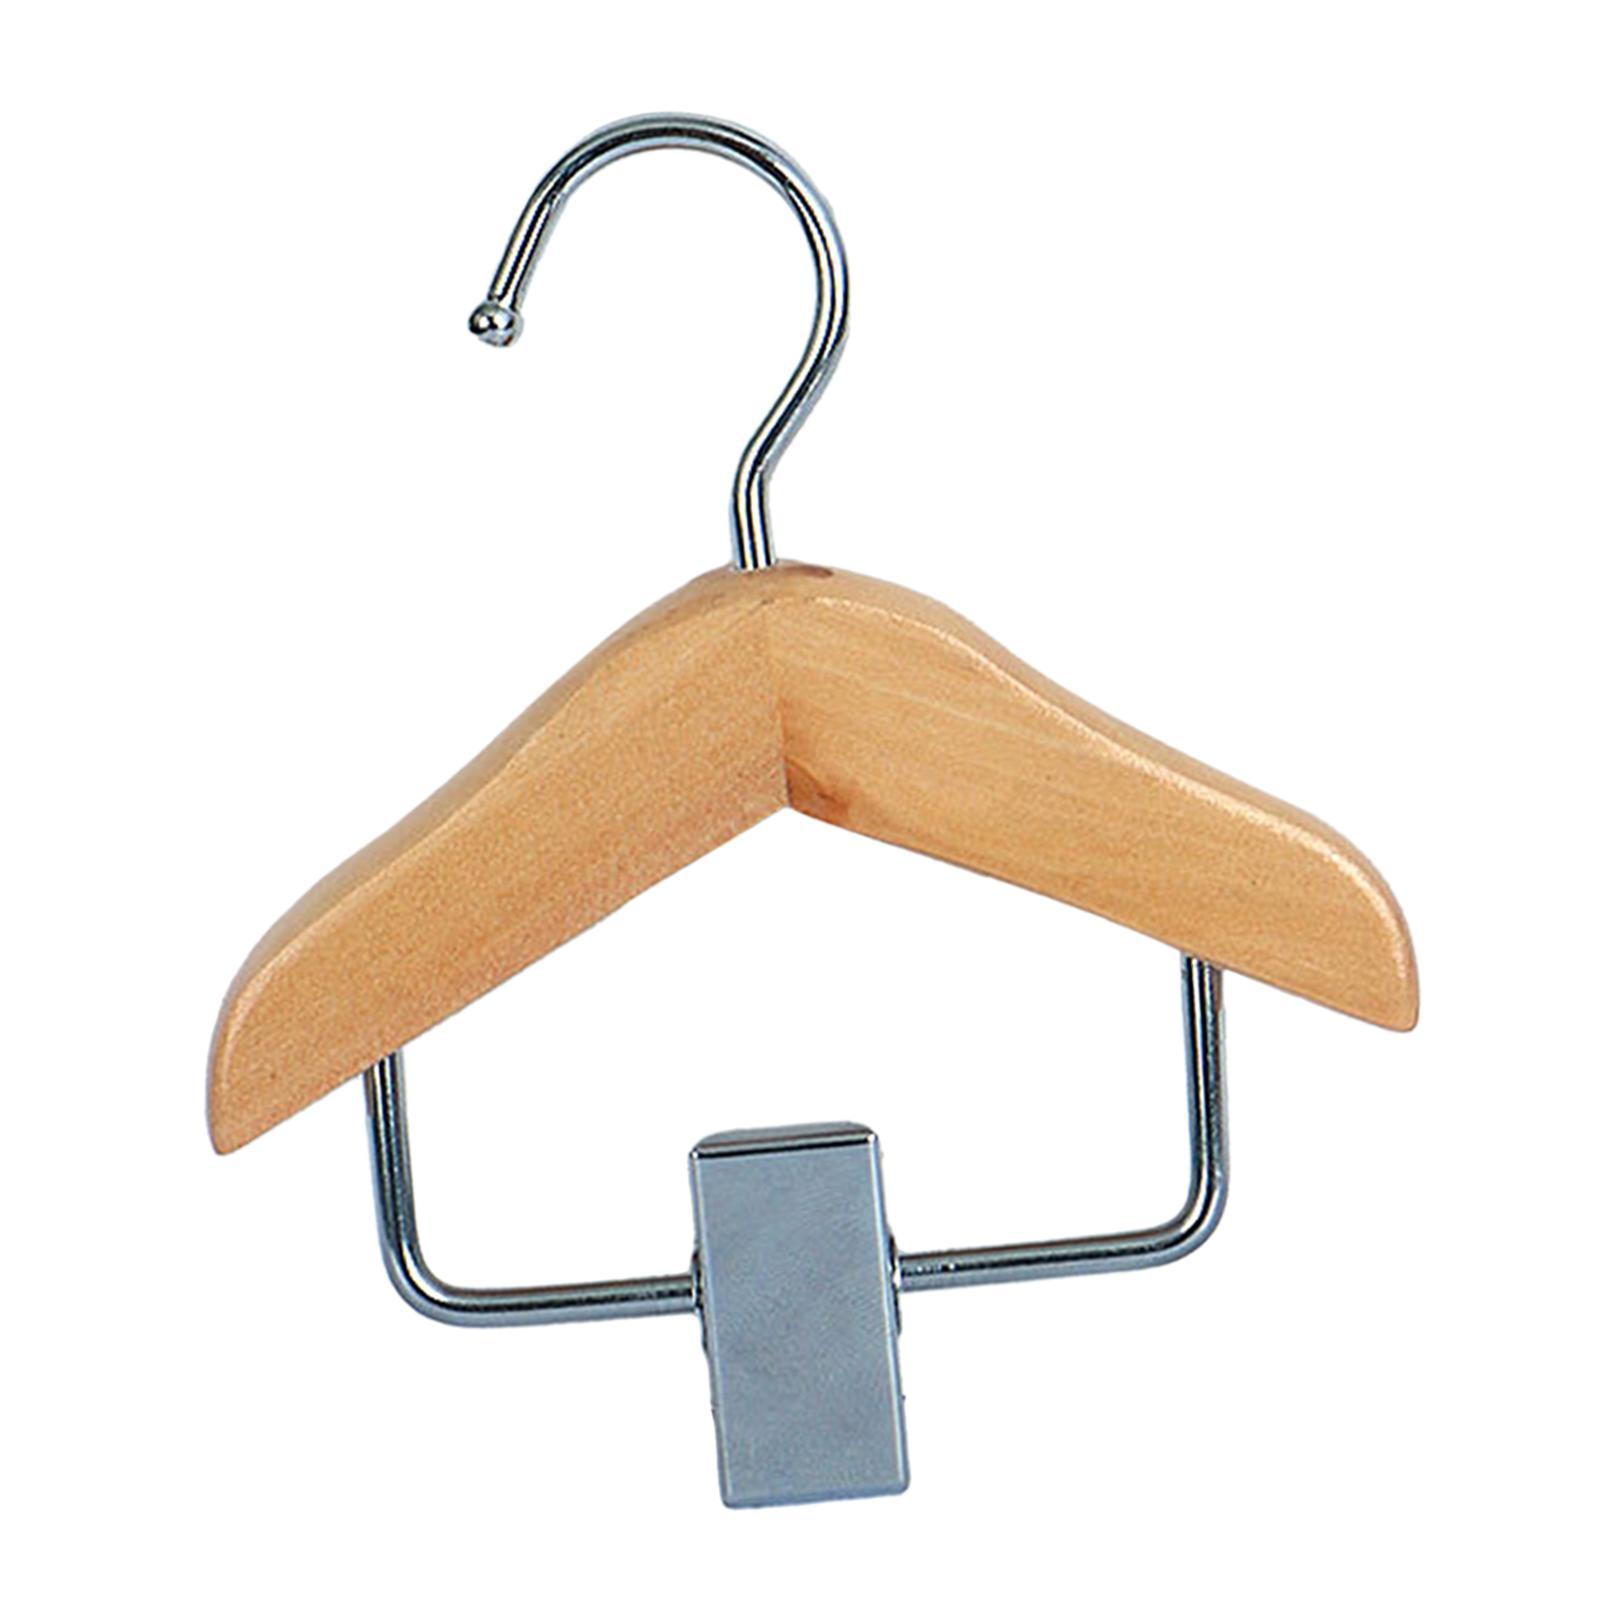 Pet Hangers Dog Coat Hanger with Clip Display Holder Elegant Pet Costume Hangers Small Clothes Hold for Pet Newborn Baby